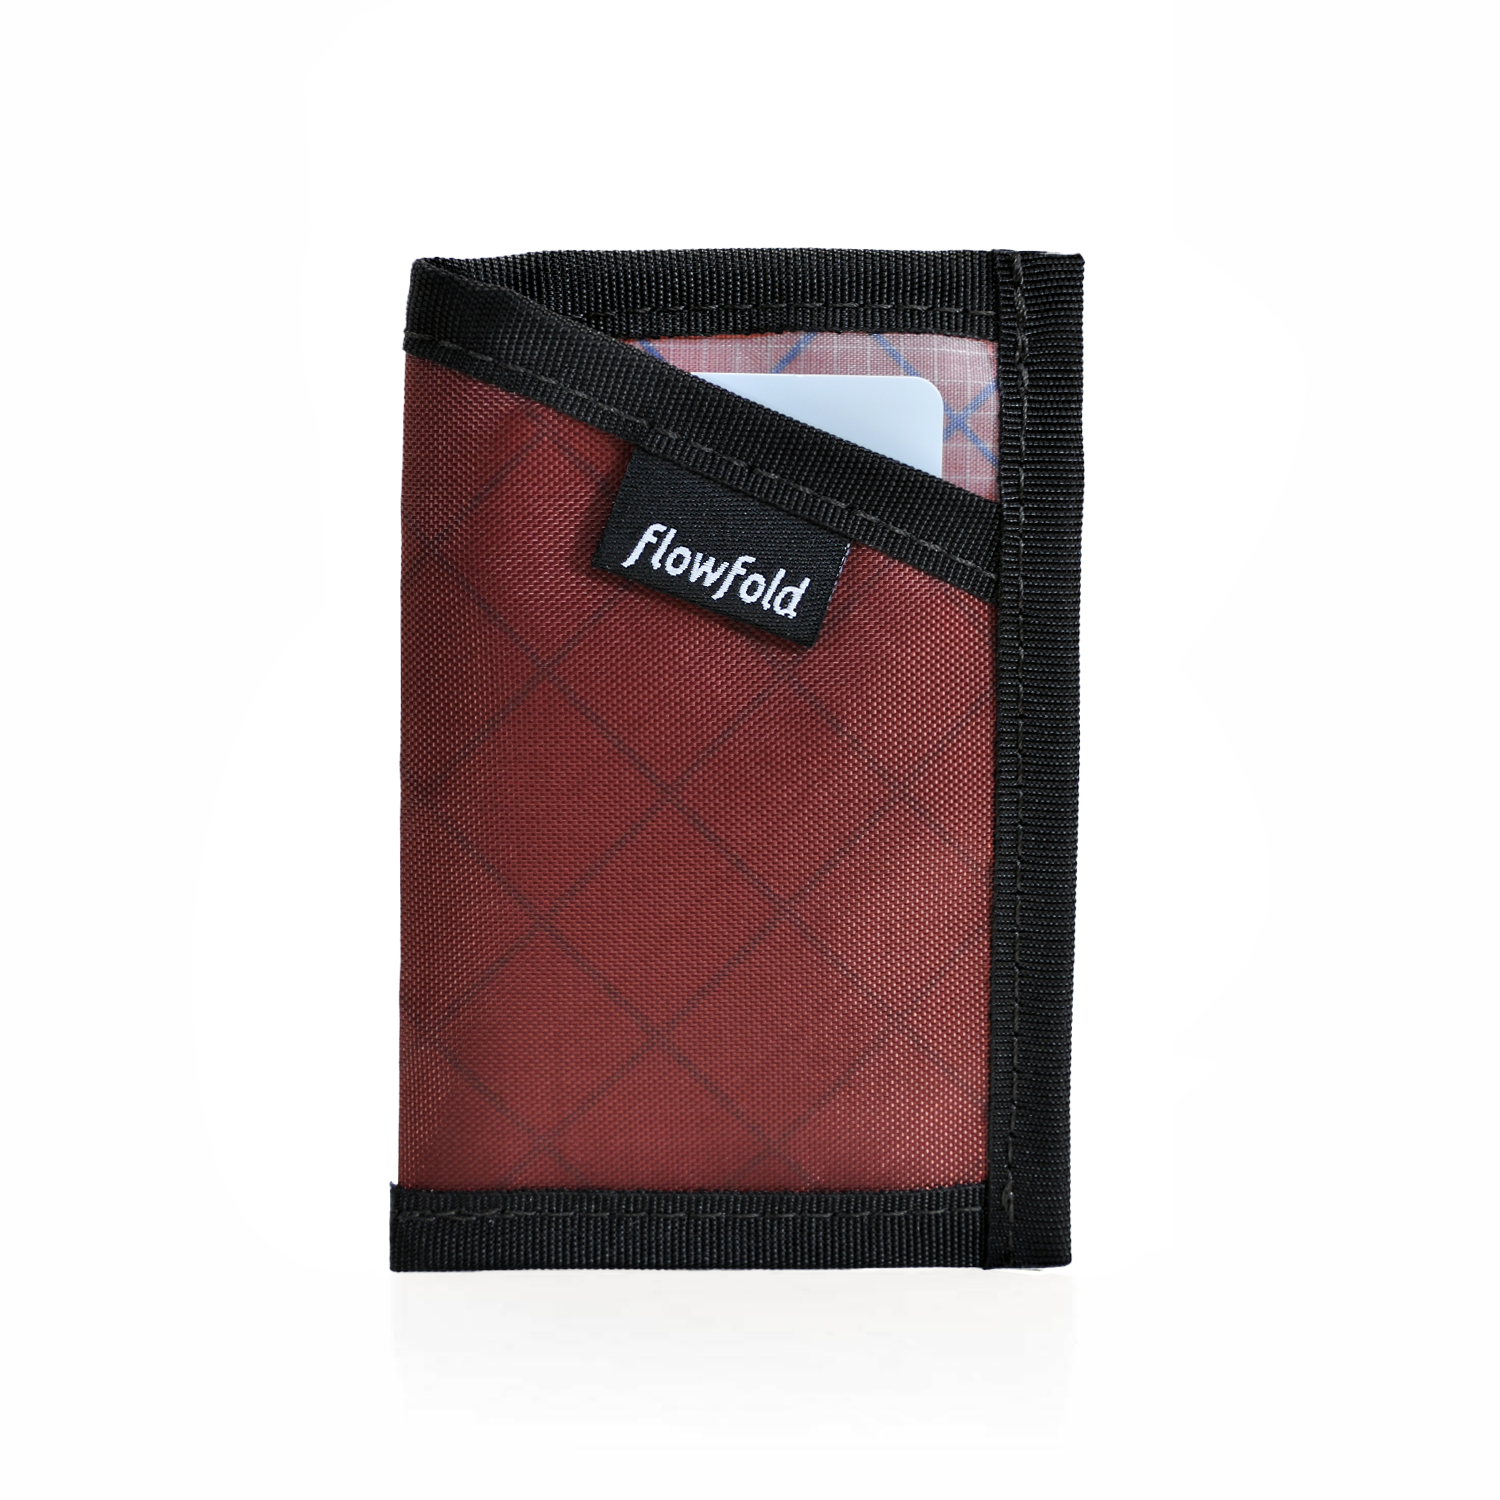 Flowfold Minimalist Card Holder Wallet Recycled Wallet of 100% Recycled Polyester EcoPak Red Barn